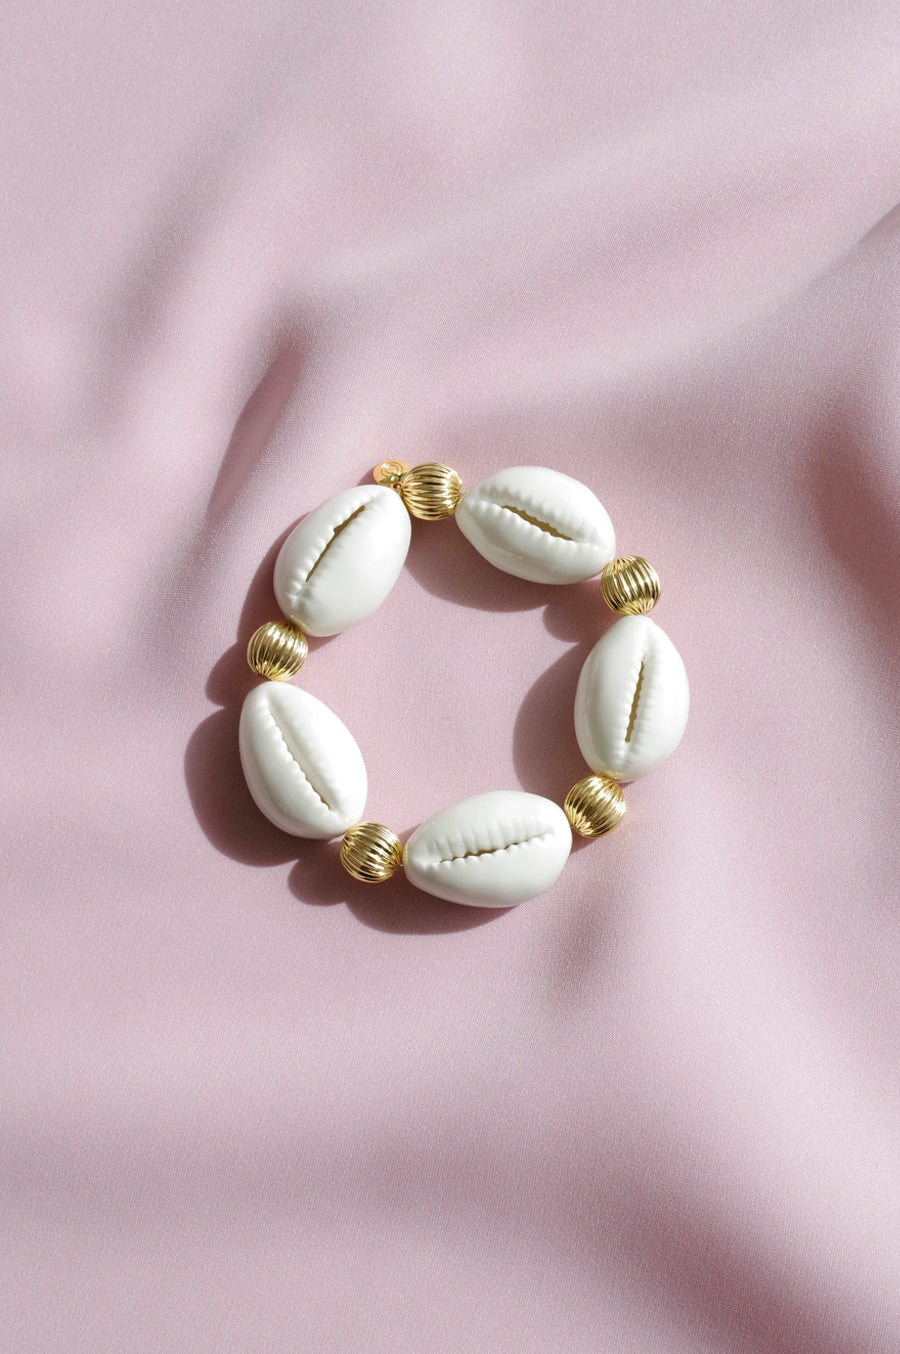 High Quality Trendy Natural Cowrie Beads Shell Anklet Bracelet Handmade  Hawaiian Beach Foot Jewelry Exquisite Bracelet Summer6086261 From Djyg,  $28.54 | DHgate.Com